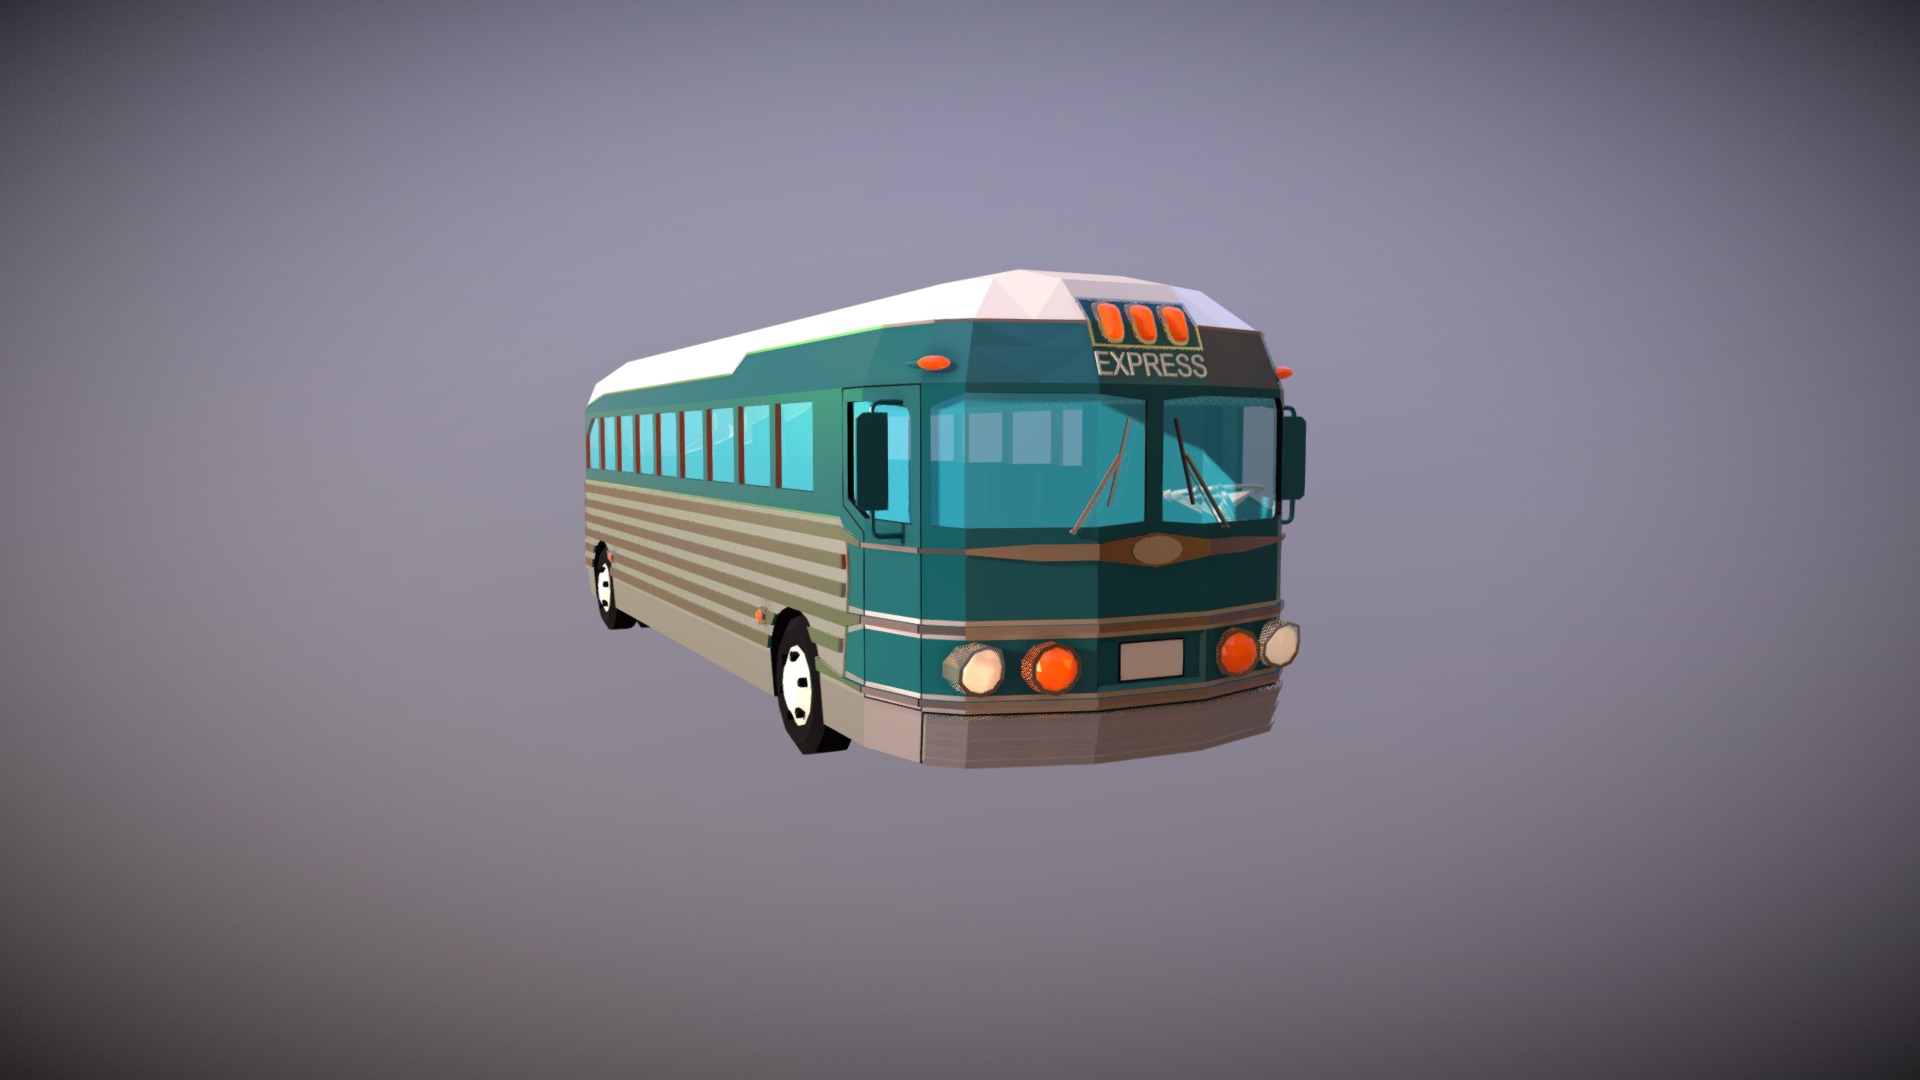 3D model Low Poly Intercity Bus - This is a 3D model of the Low Poly Intercity Bus. The 3D model is about a toy bus on a surface.